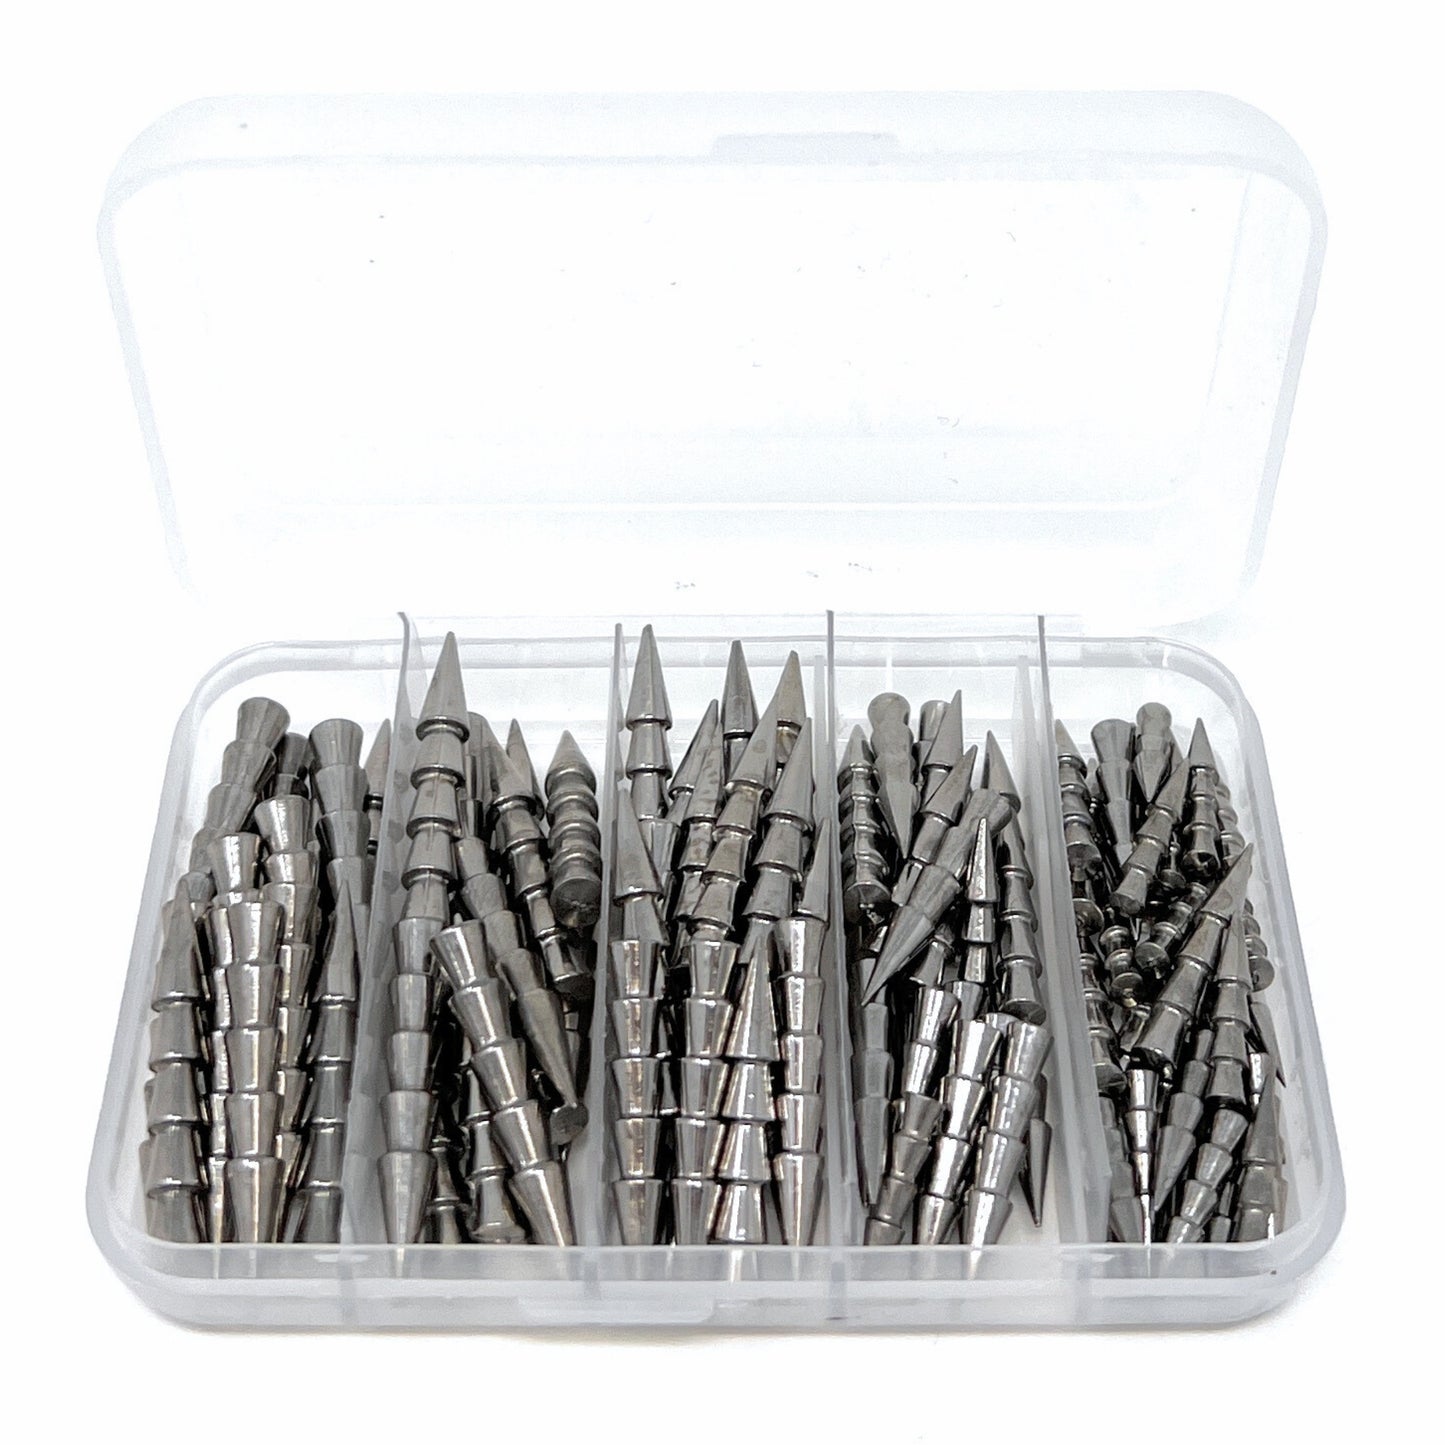  Reaction Tackle Lead Nail Weights - 1/32 oz : Sports